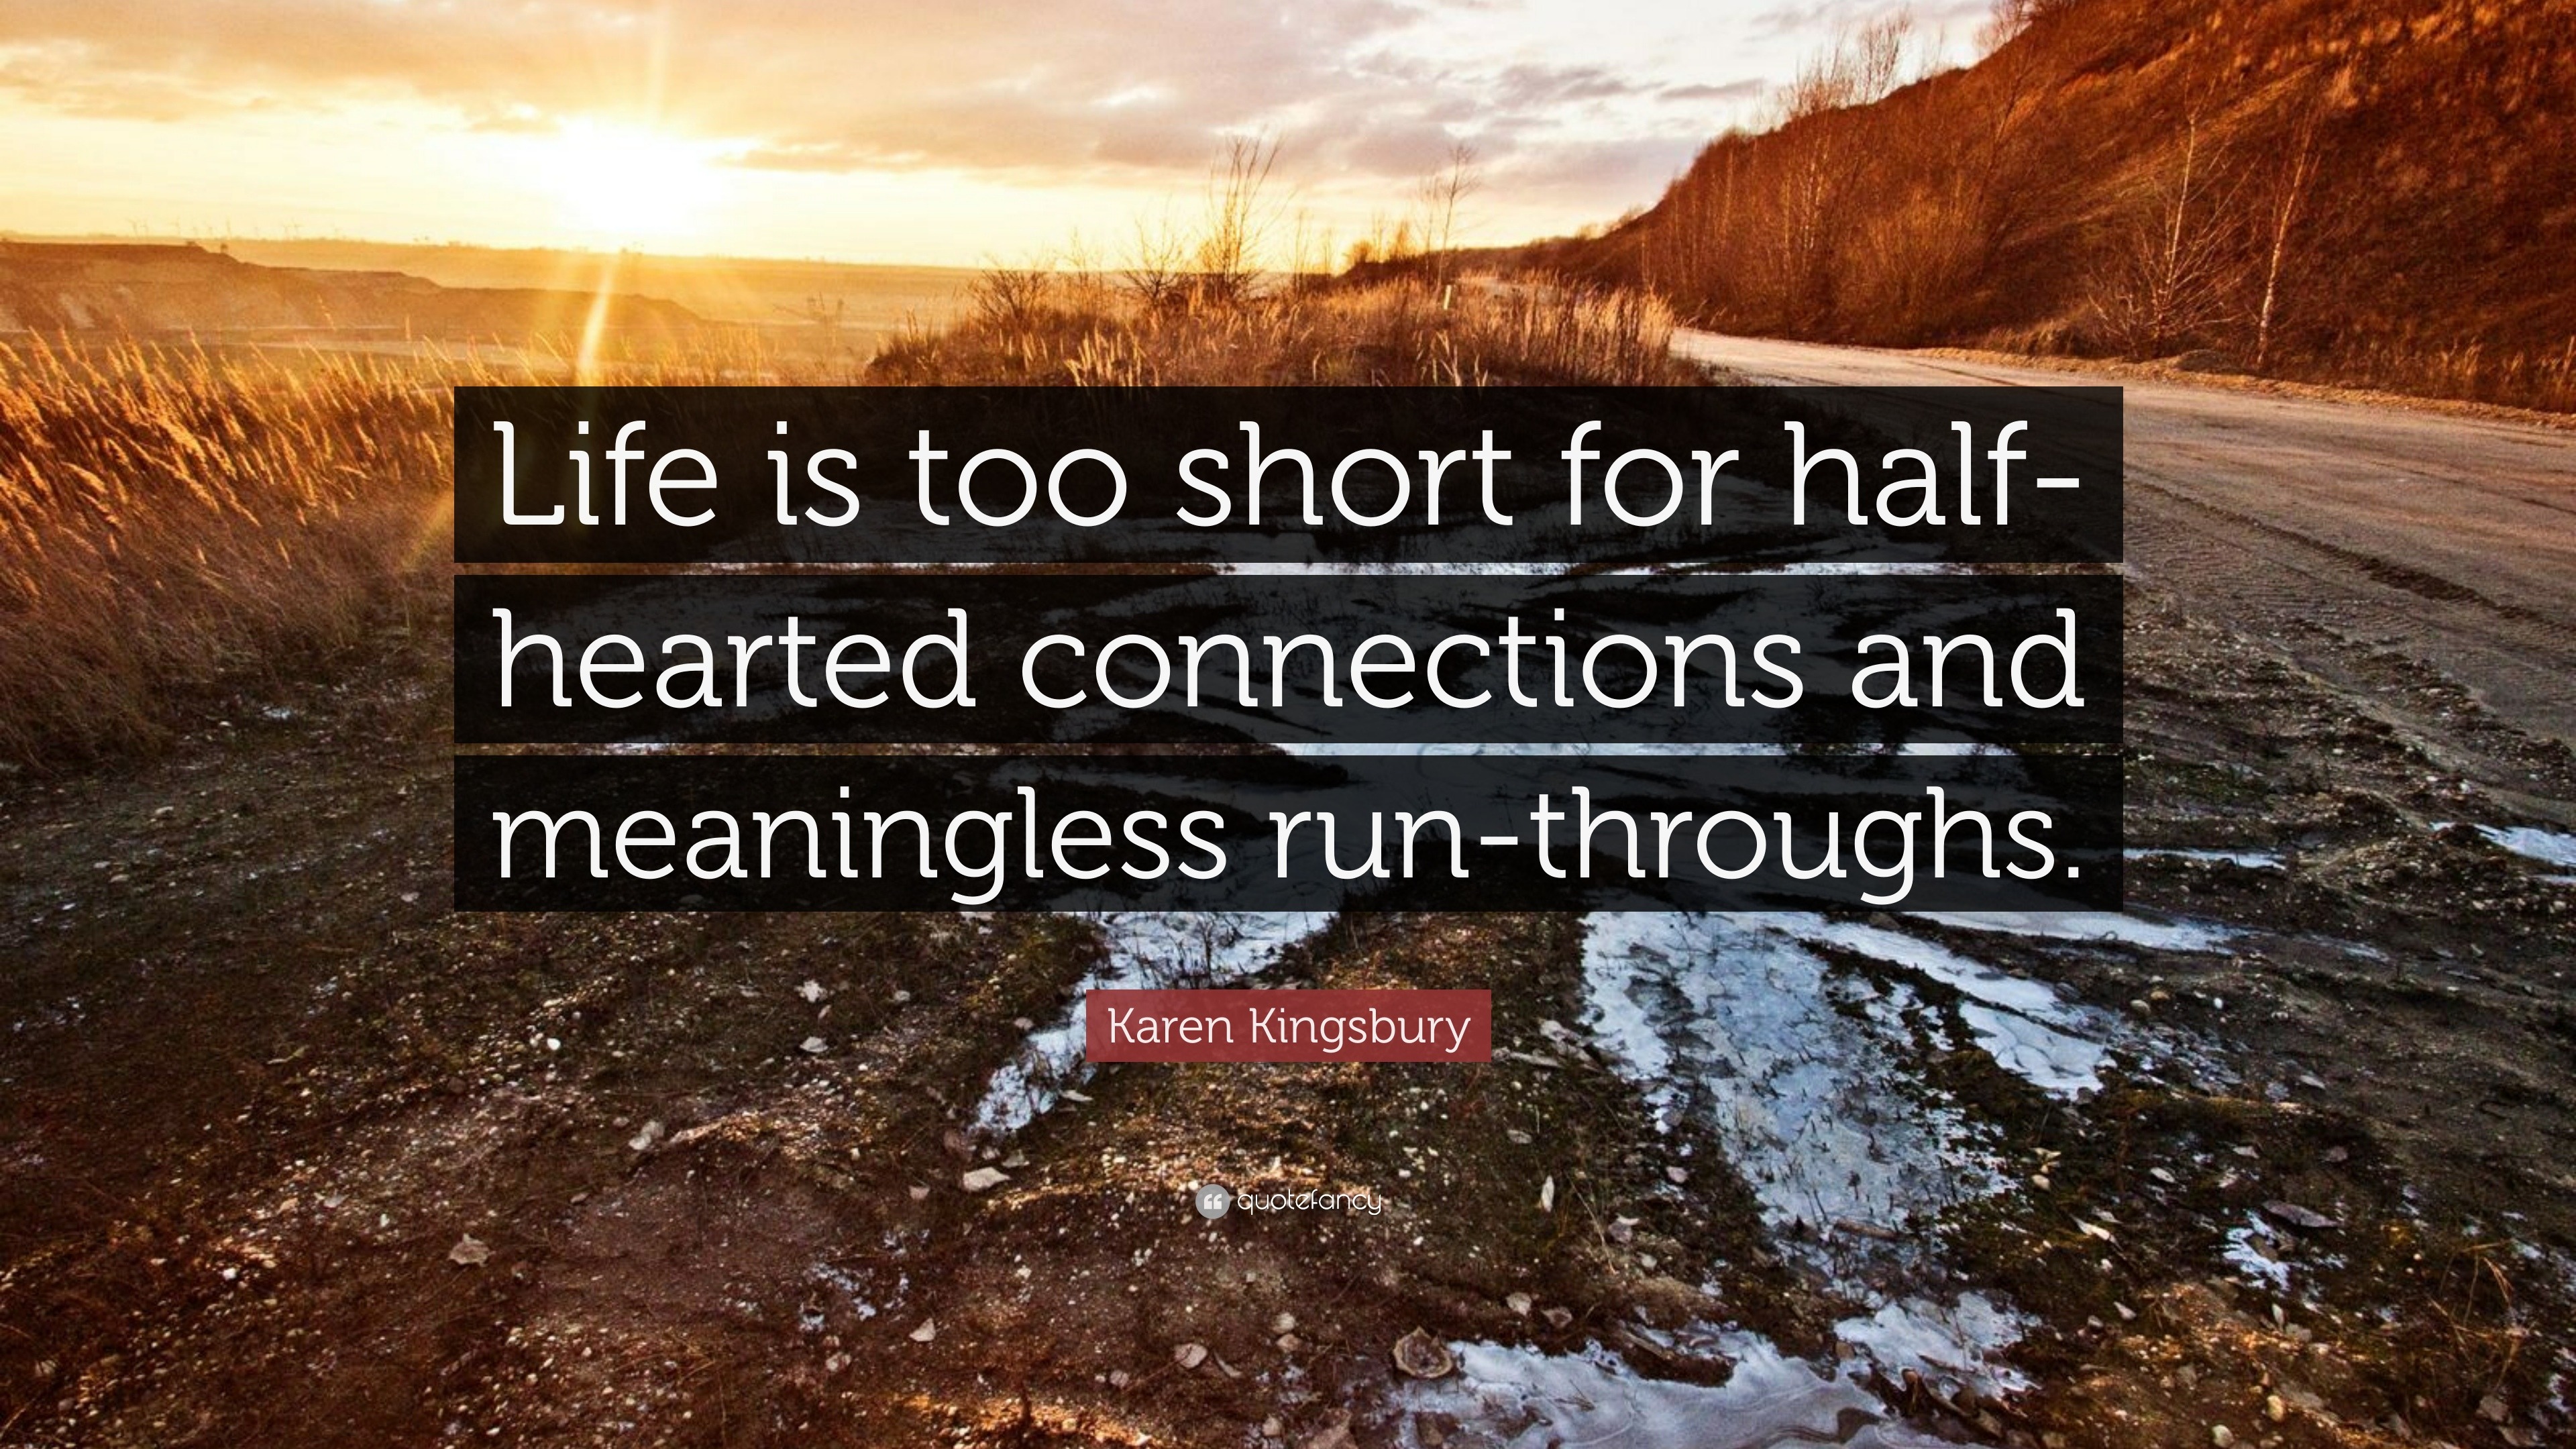 Karen Kingsbury Quote “Life is too short for halfhearted